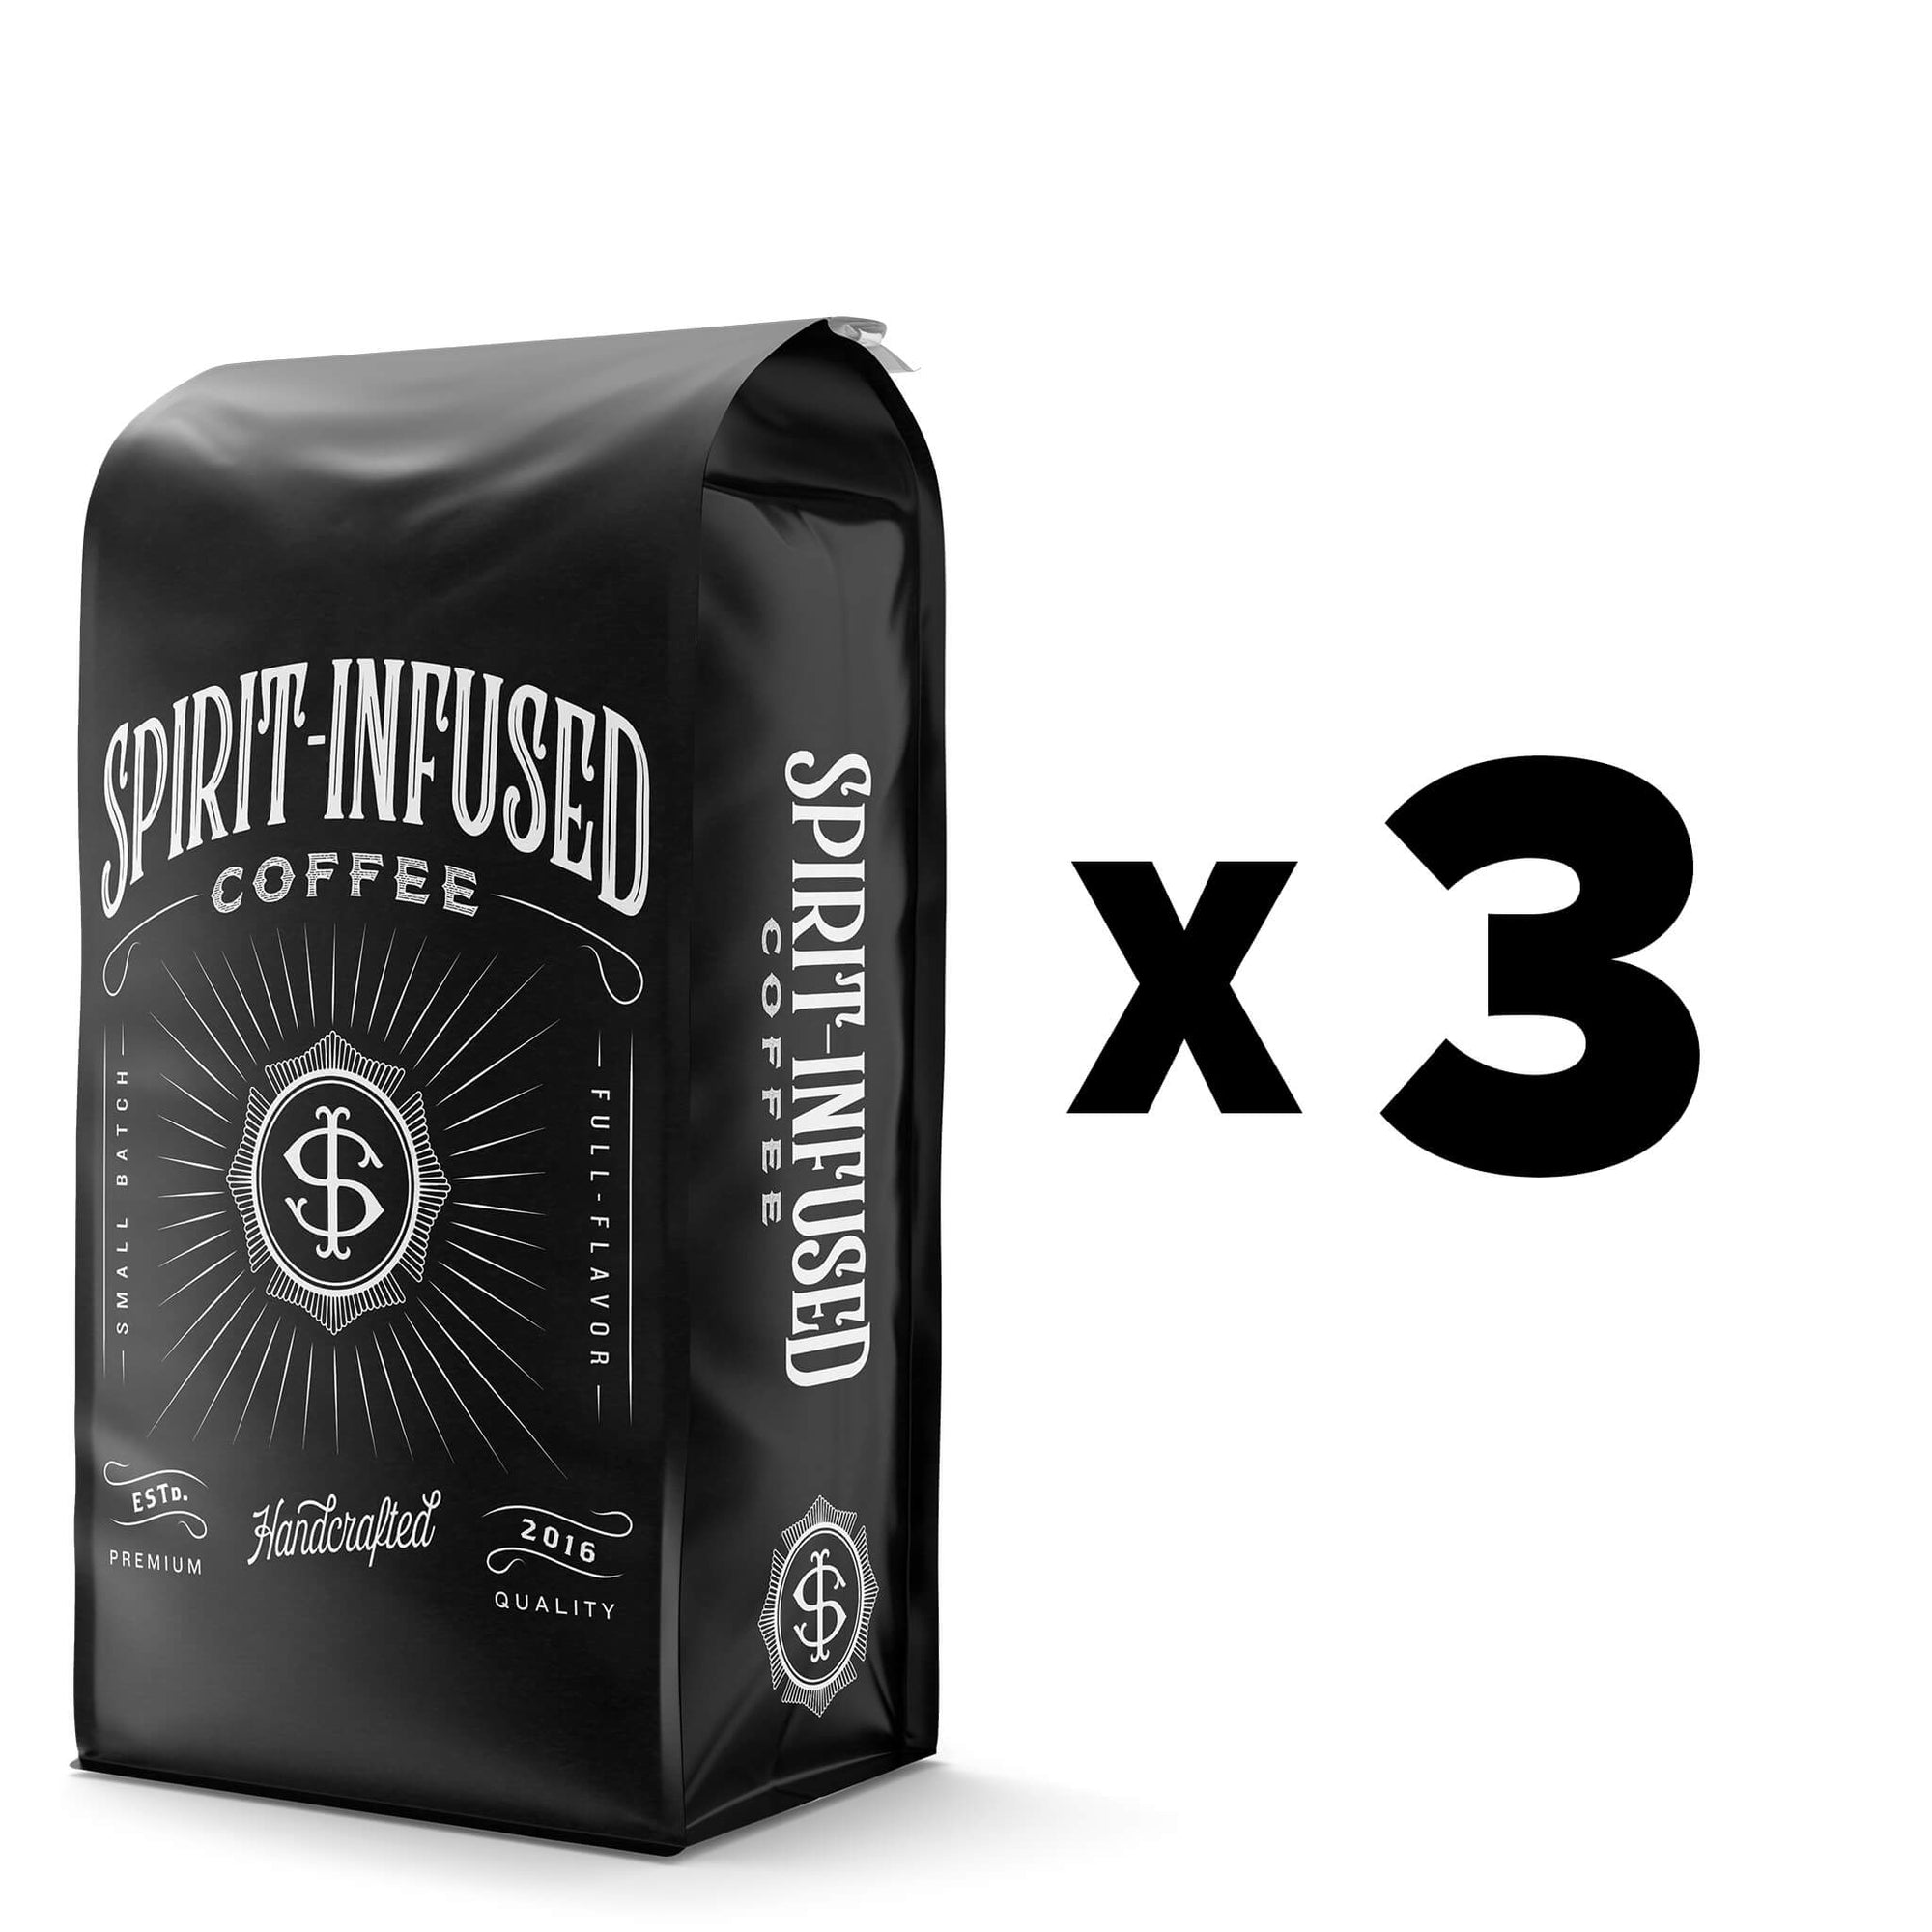 SPIRIT INFUSED COFFEE CLUB GROUND - 3 MONTH PREPAID SUBSCRIPTION